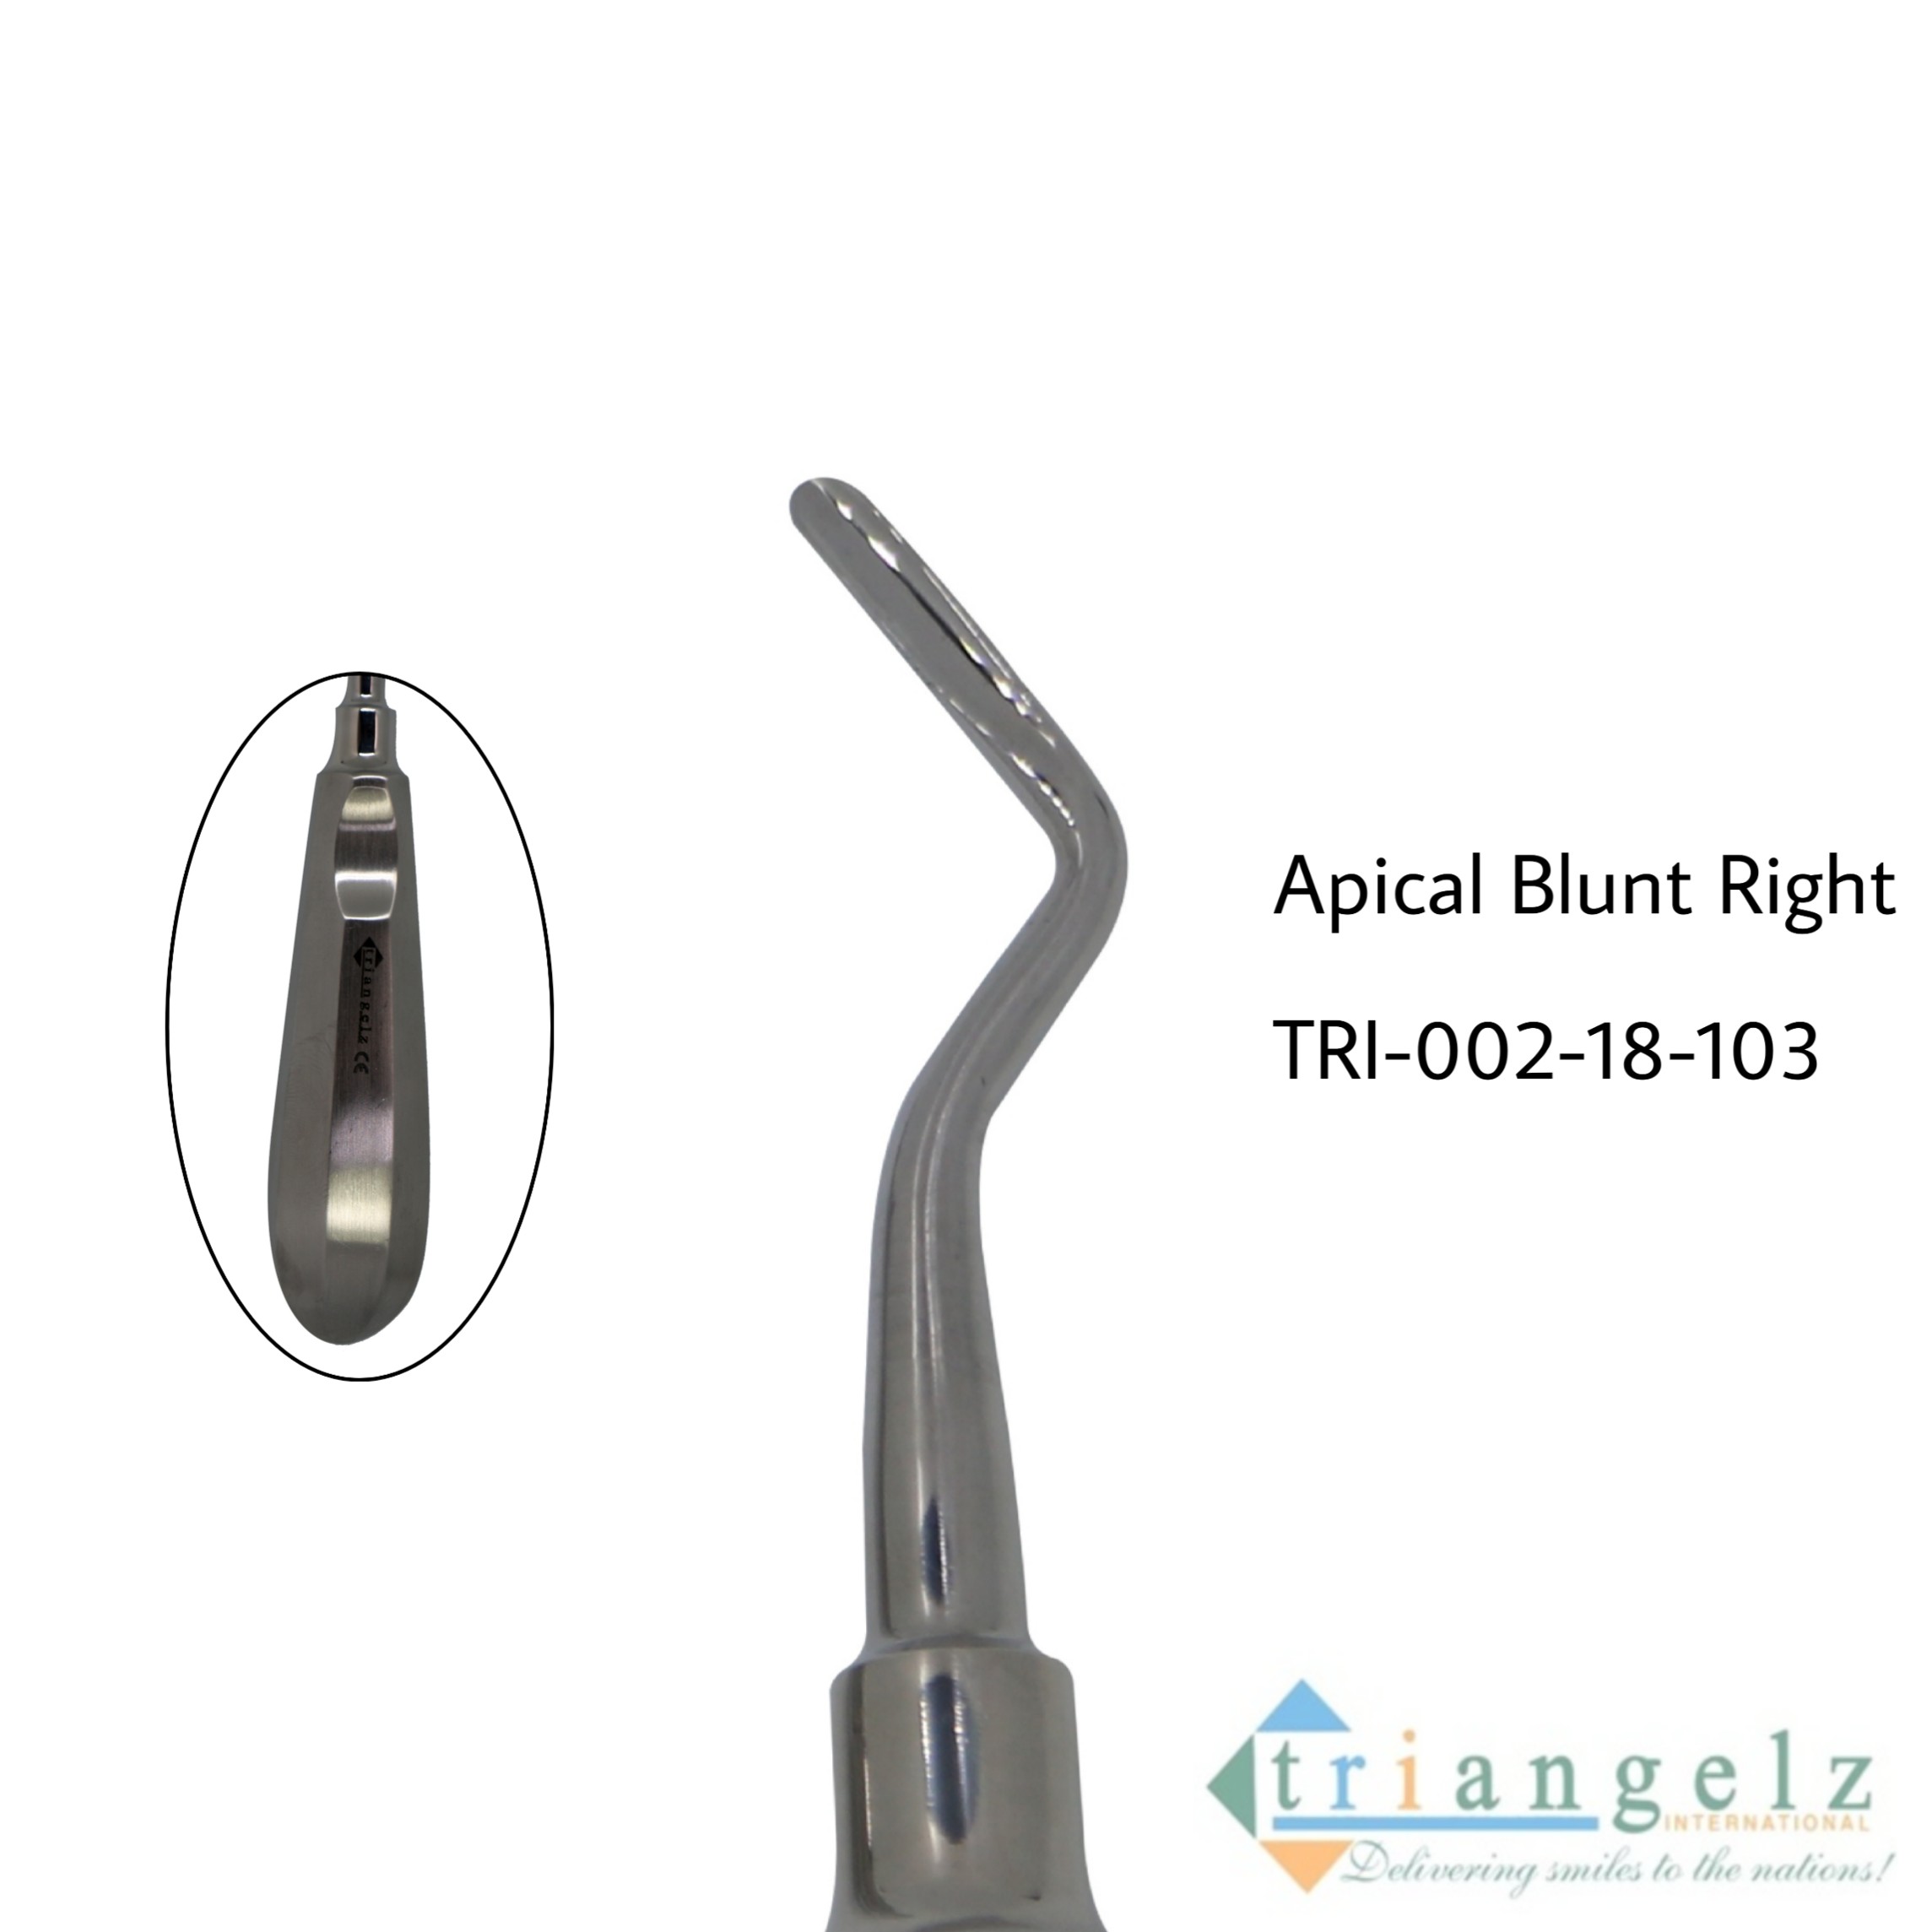 TRI-002-18-103 Apical Blunt Right